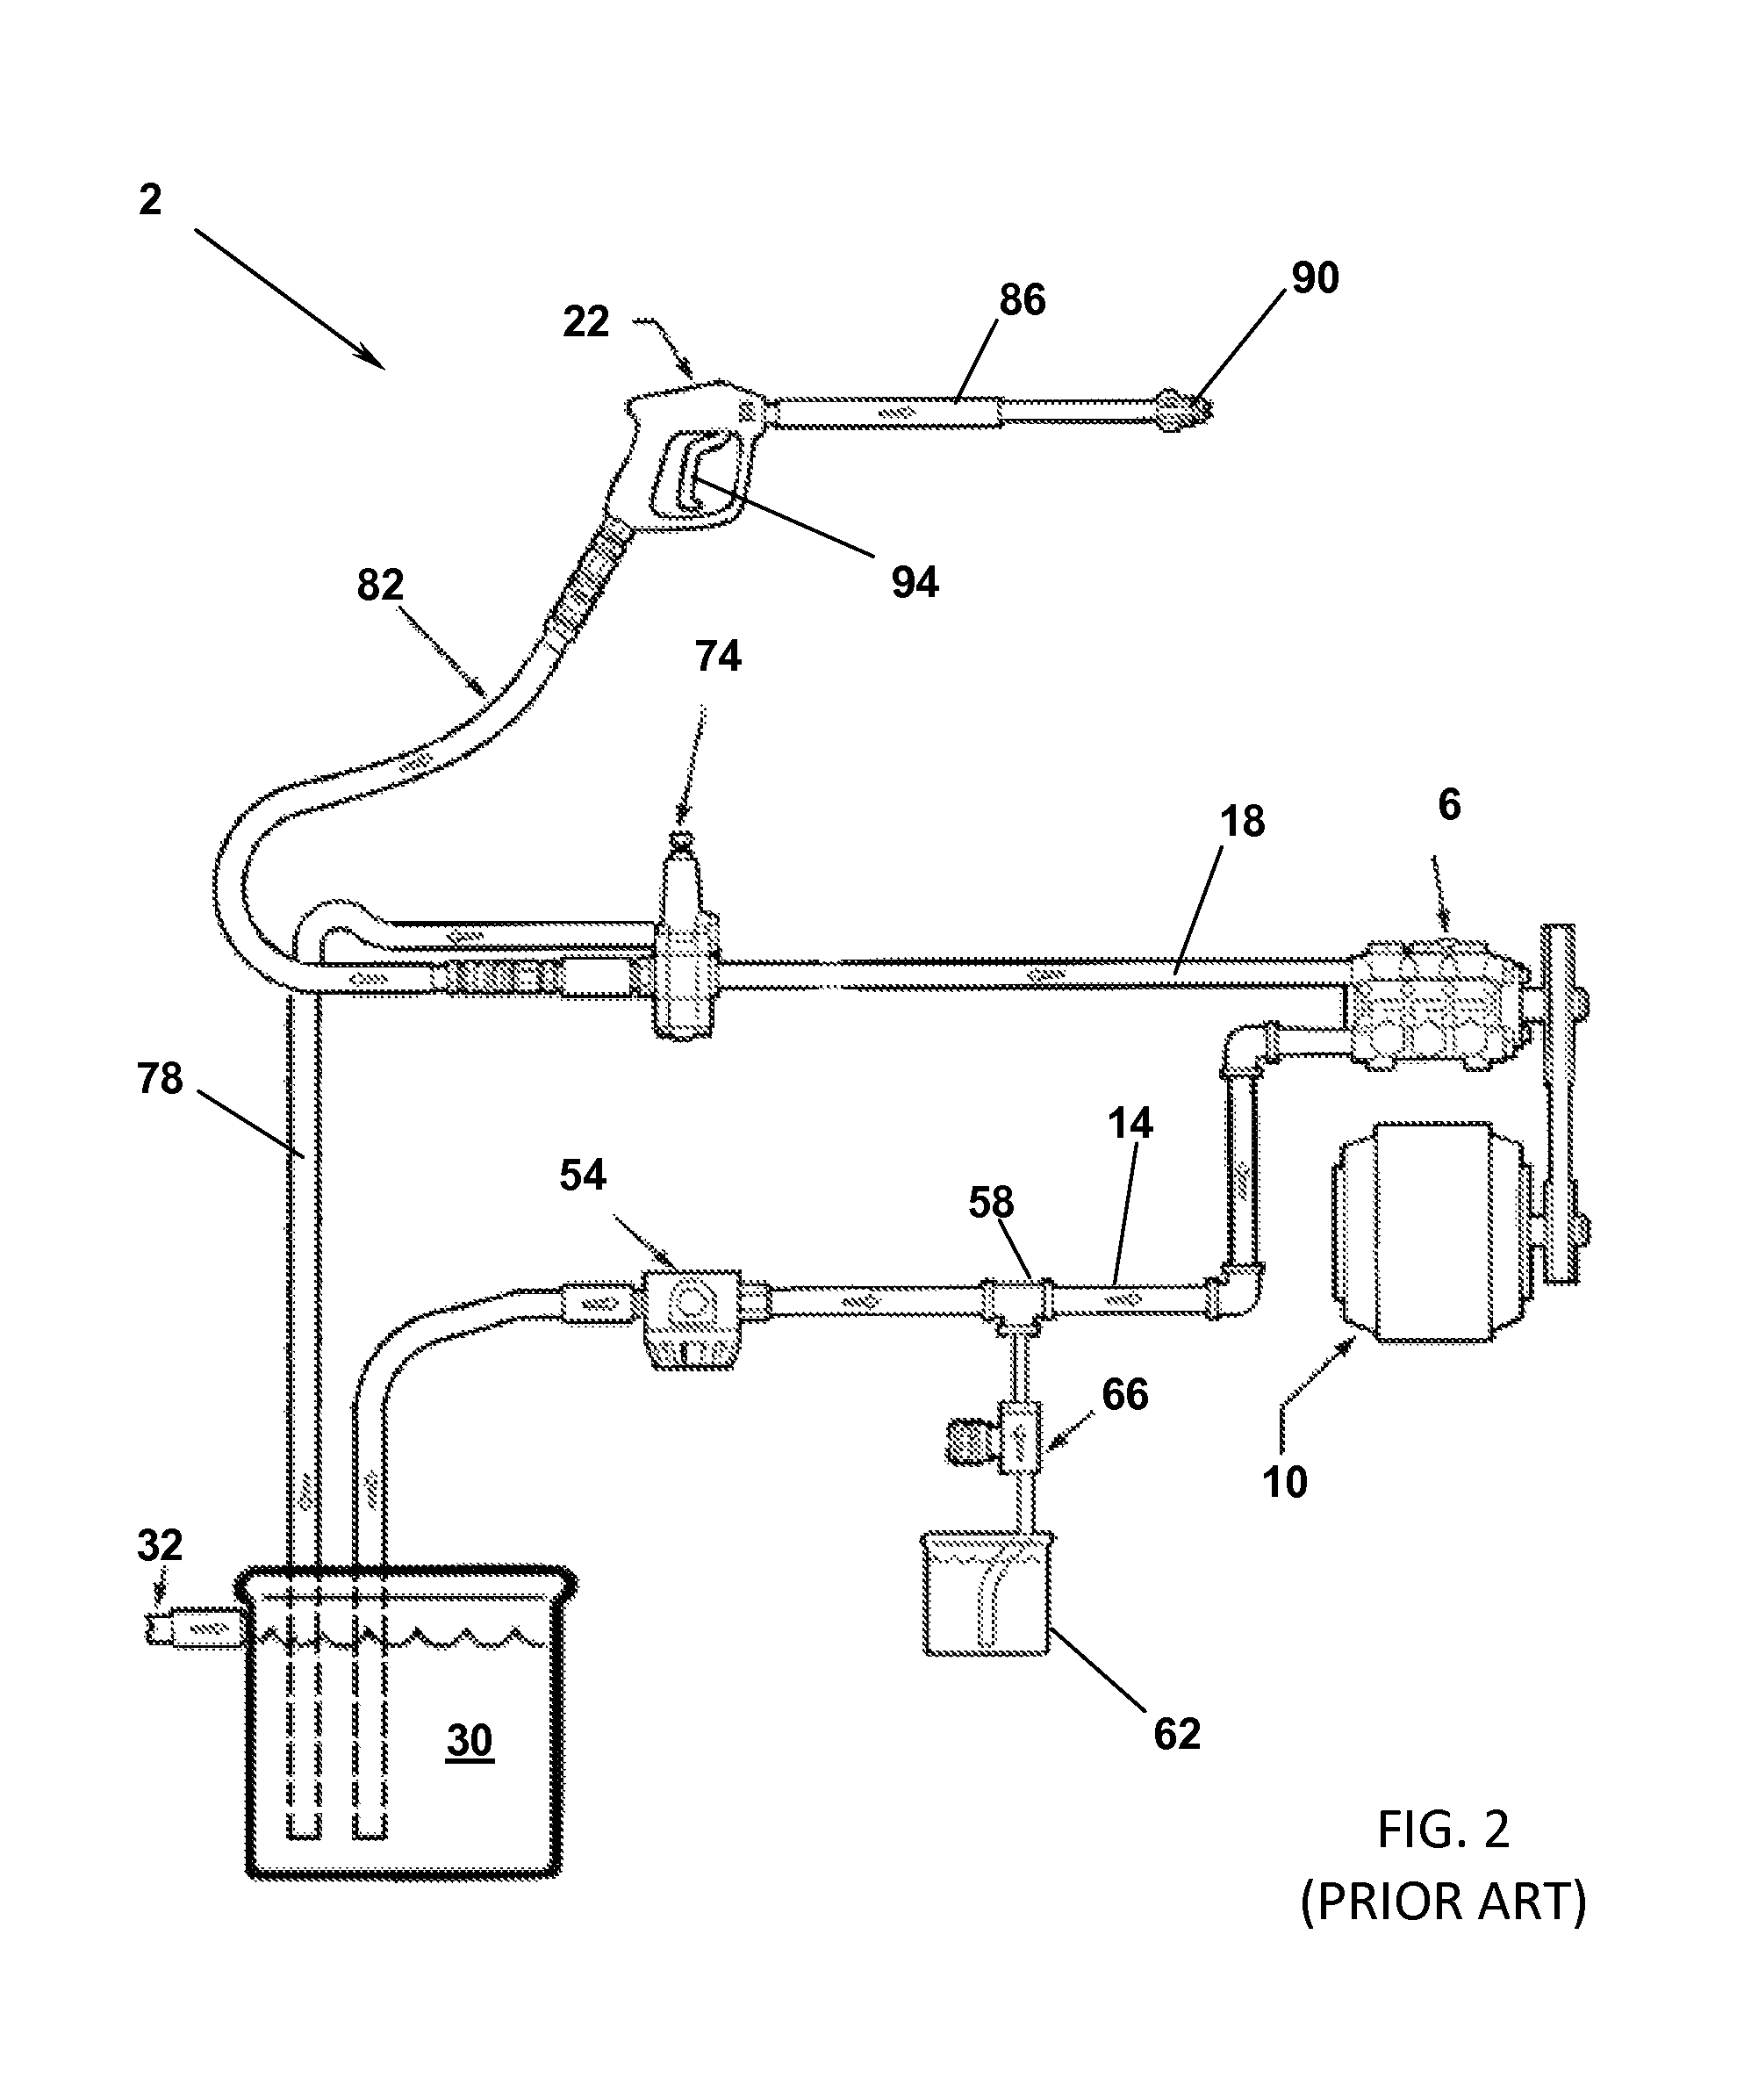 Pressure washer device employing a cool bypass